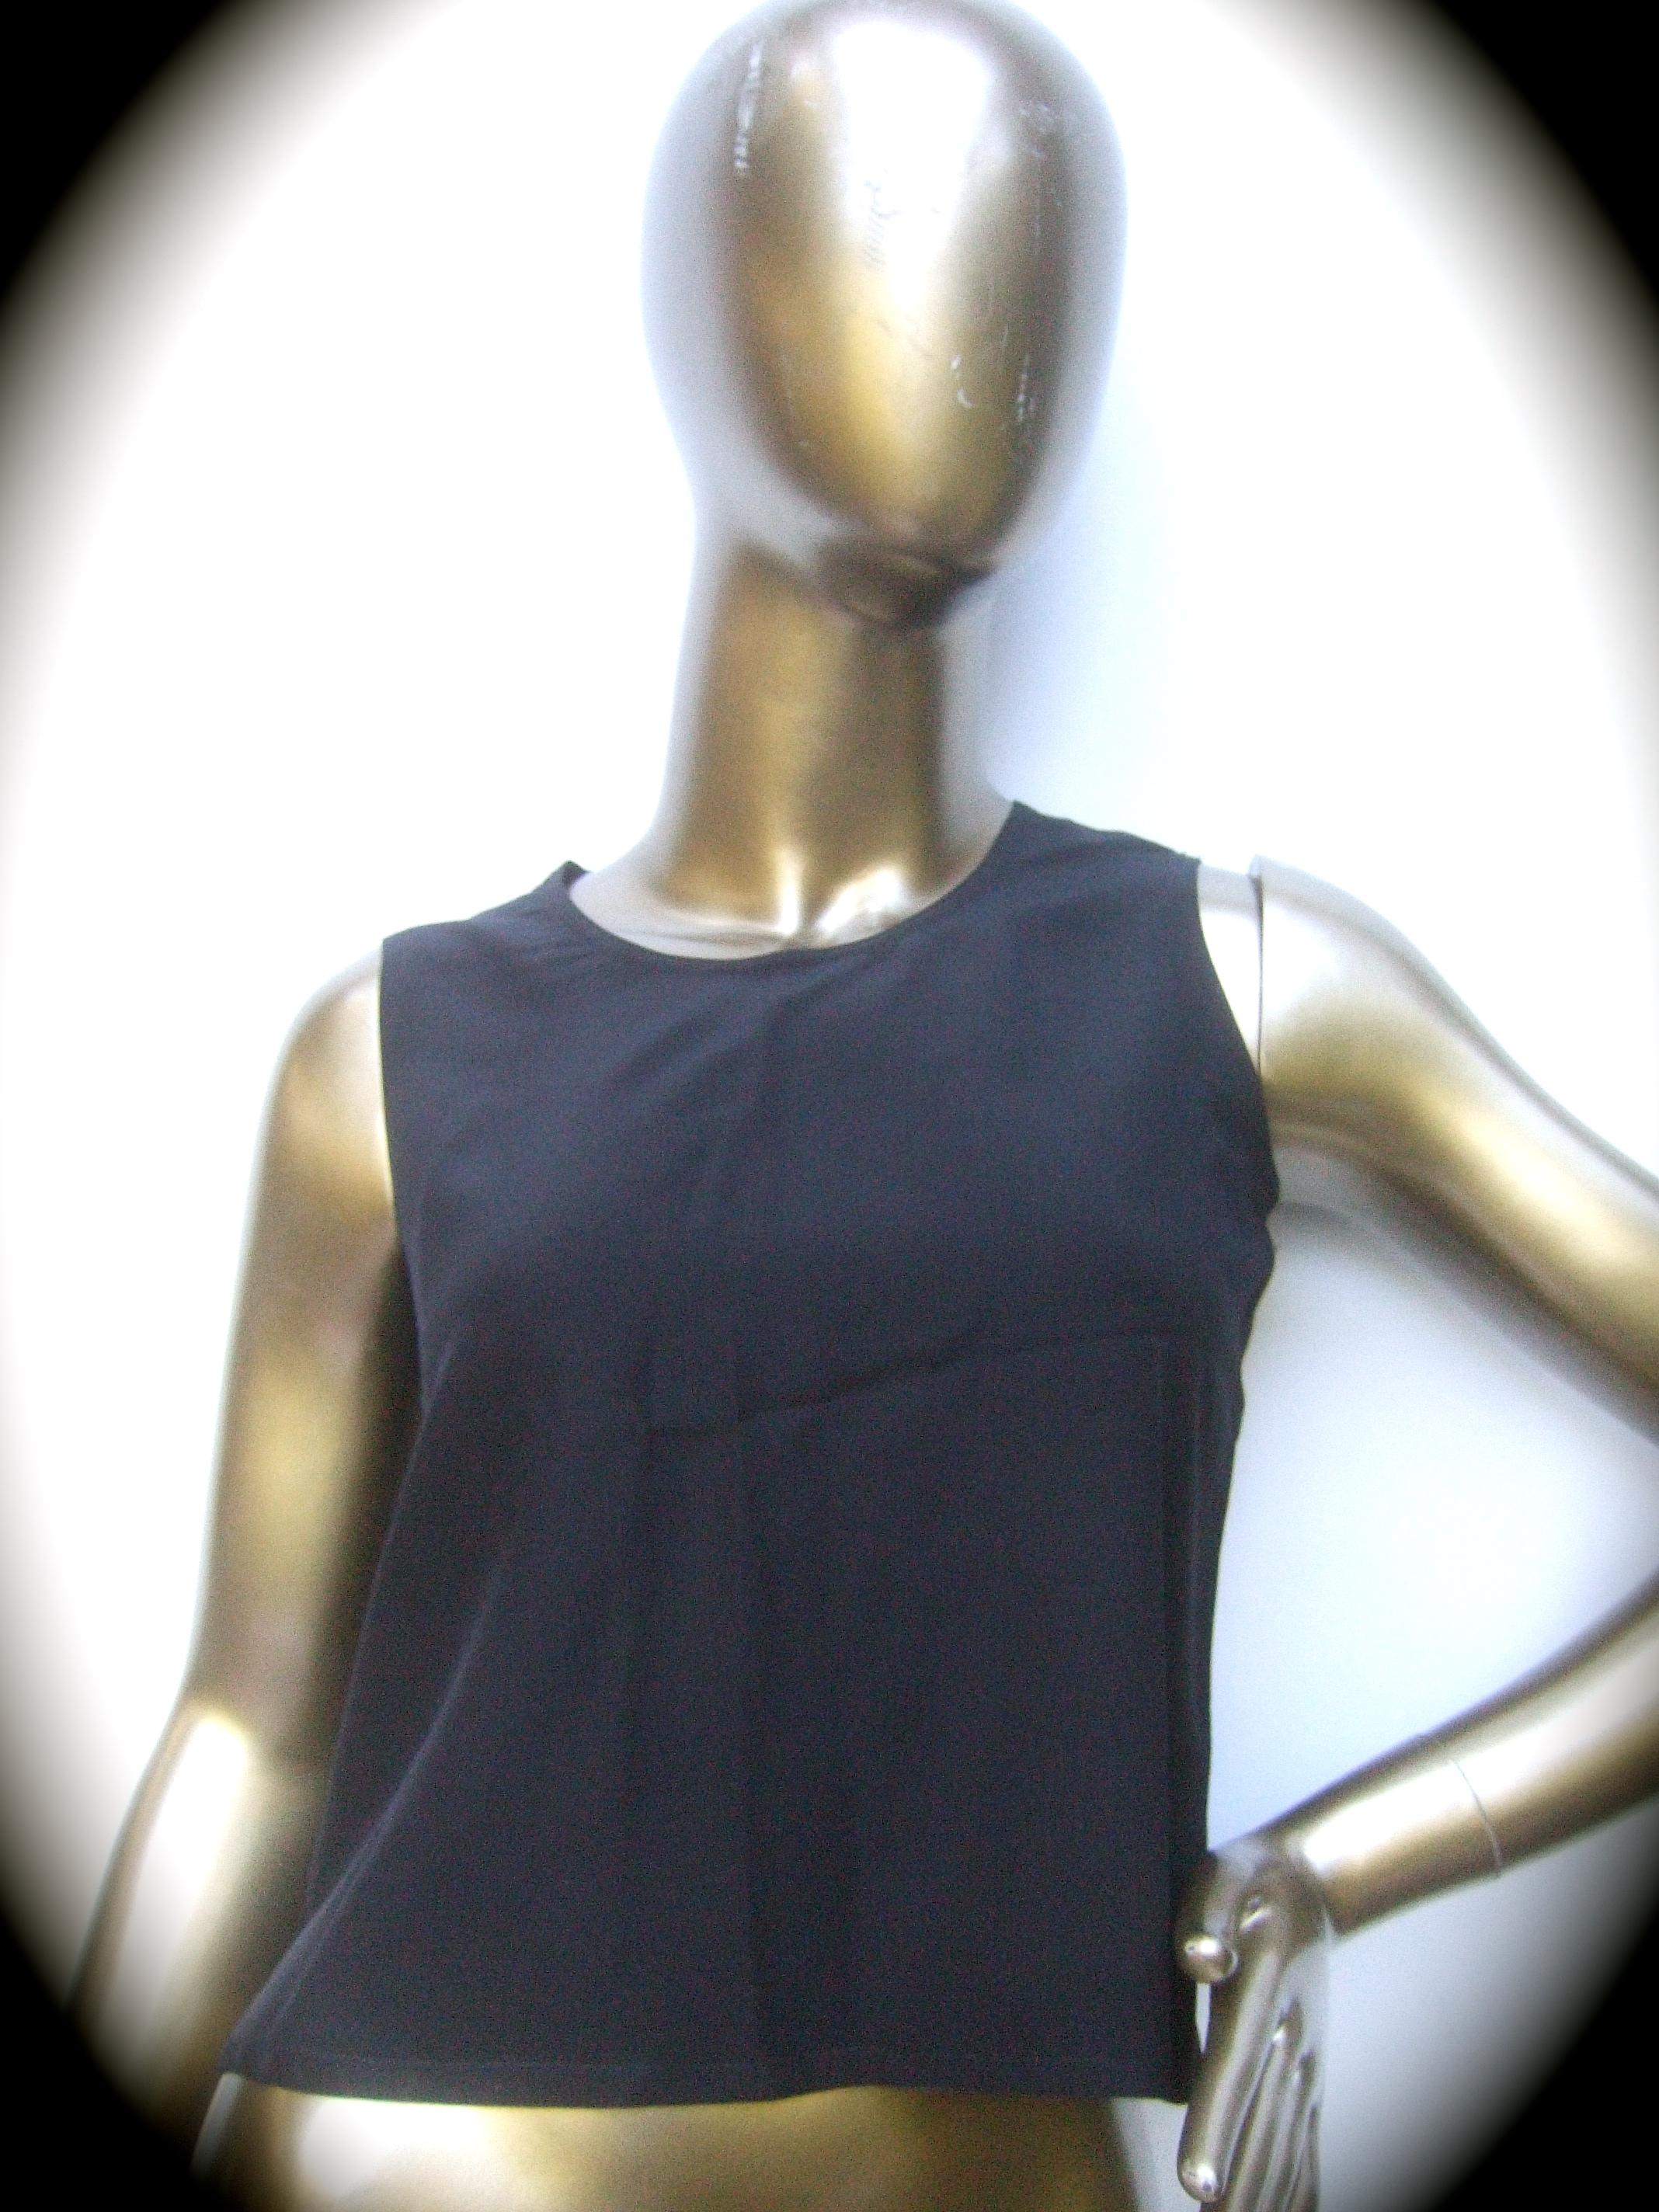 Chanel Black silk sleeveless petite shell top c 1980s (Petite)
Constructed with luxurious breezy silk fabric 
The stylish Chanel silk shell makes a versatile timeless garment 
The back neckline secures with a single snap button 
Labeled: Chanel 
No